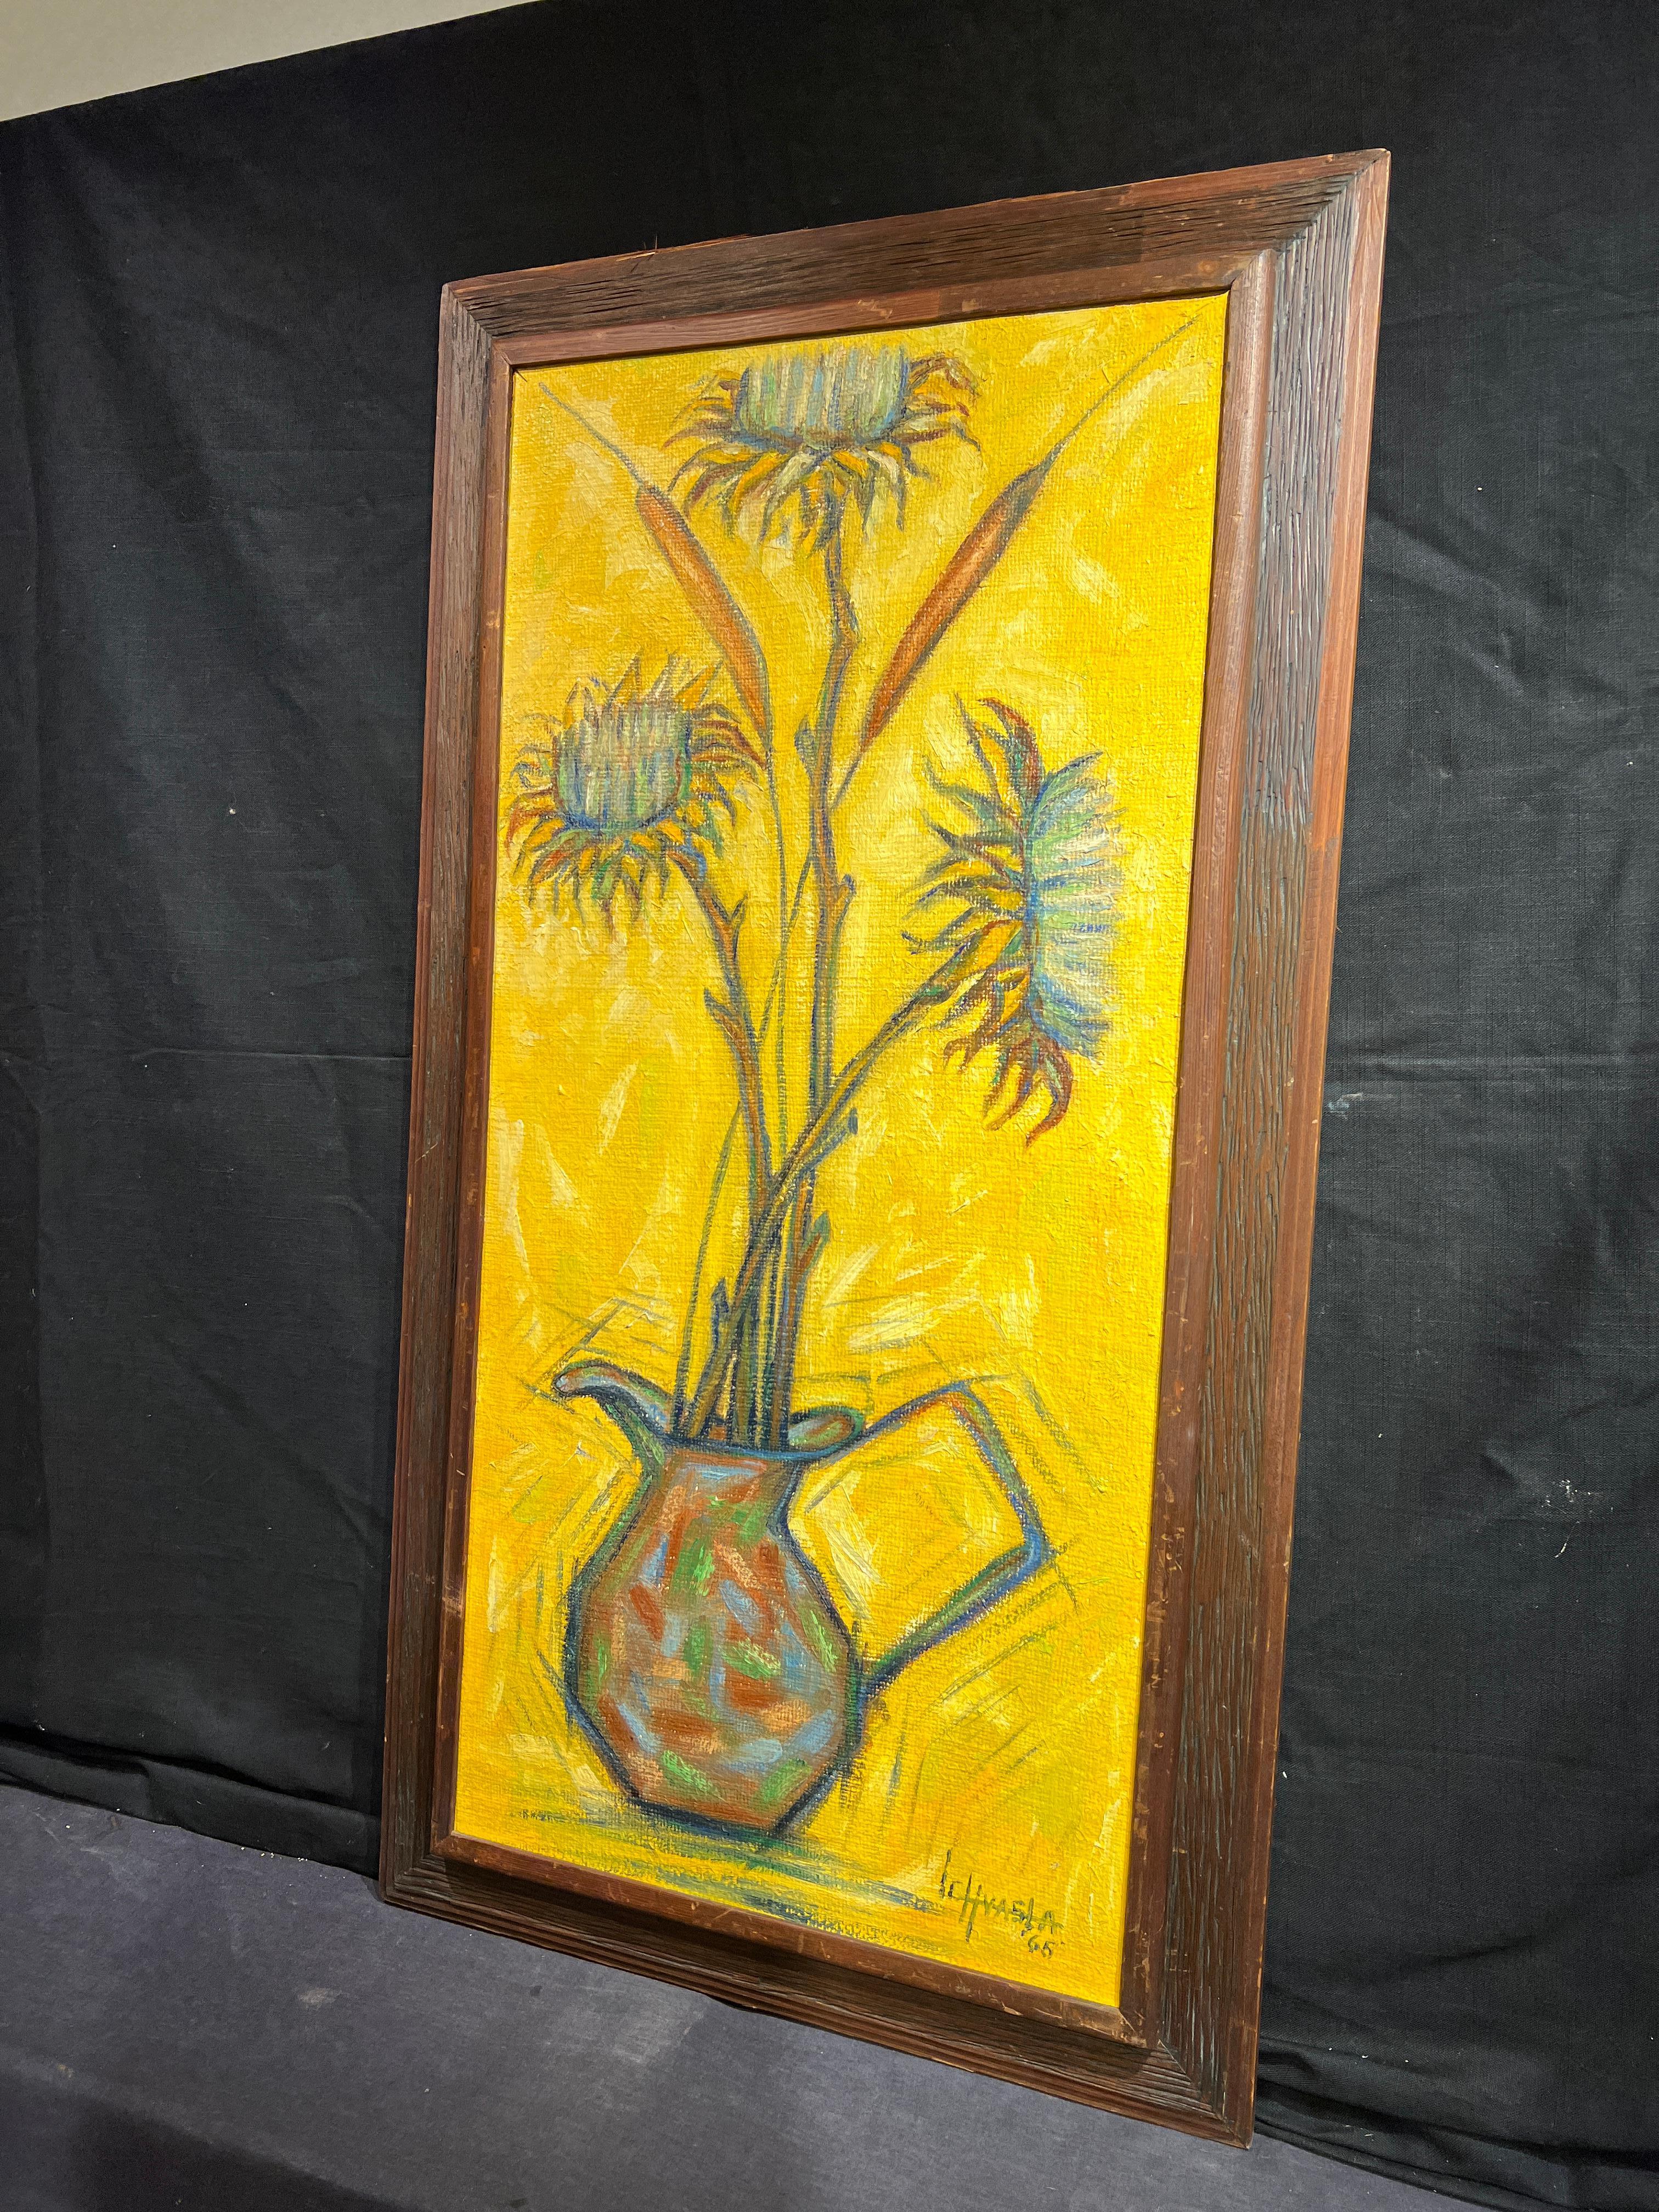 Thistles by Louis Carl Hvasta (1913-1993) 
Signed and Dated Lower Right
Unframed: 36